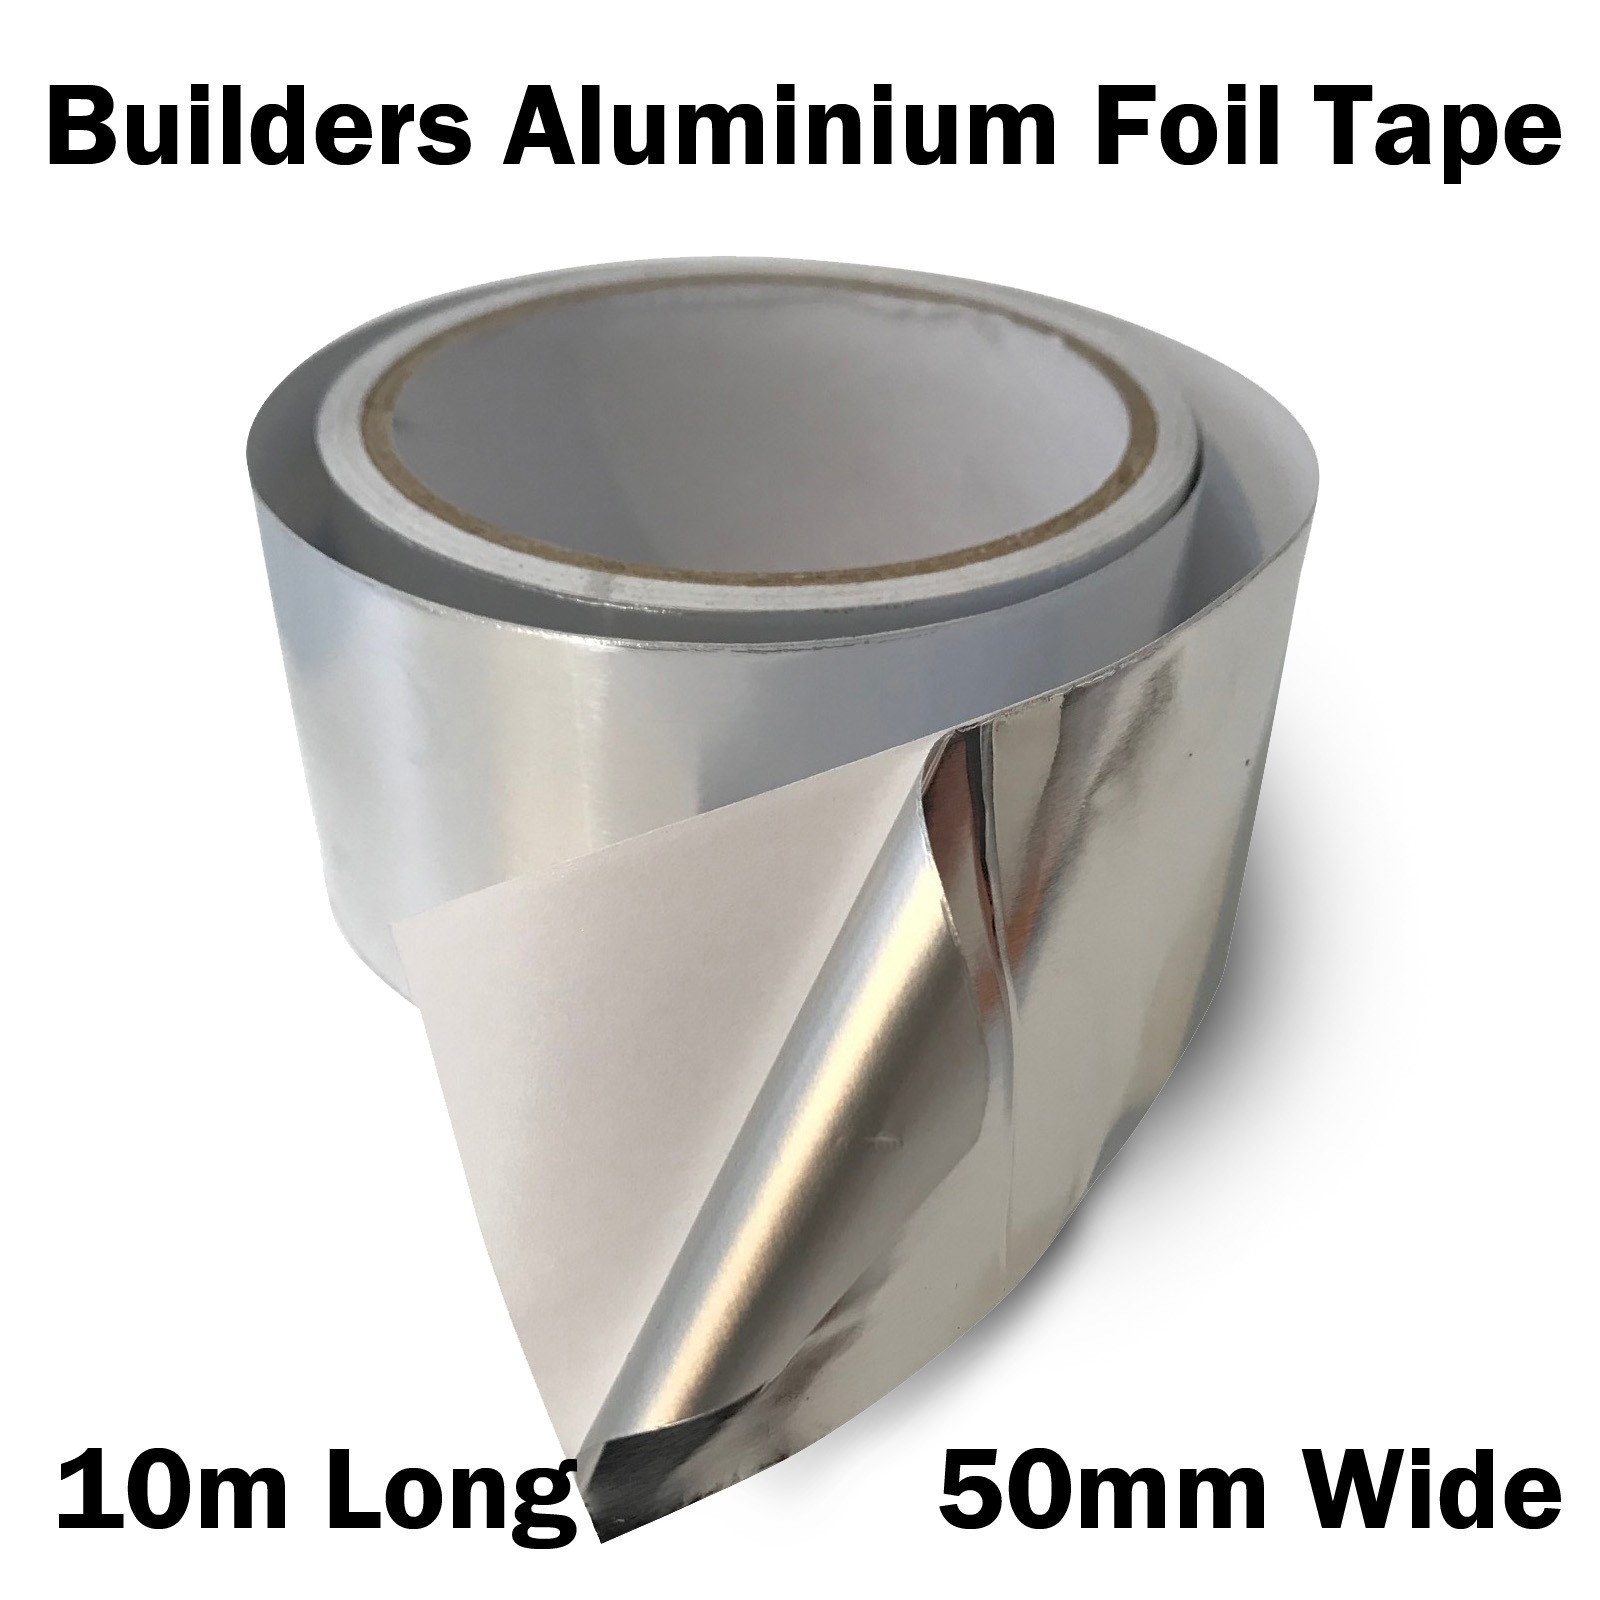 Multi-Purpose Silver Adhesive Metal Tape for Repairs 33 ft Ducts 1 Roll 1.88 inches x 11 Yards Insulation GTSE Aluminum Foil Tape 